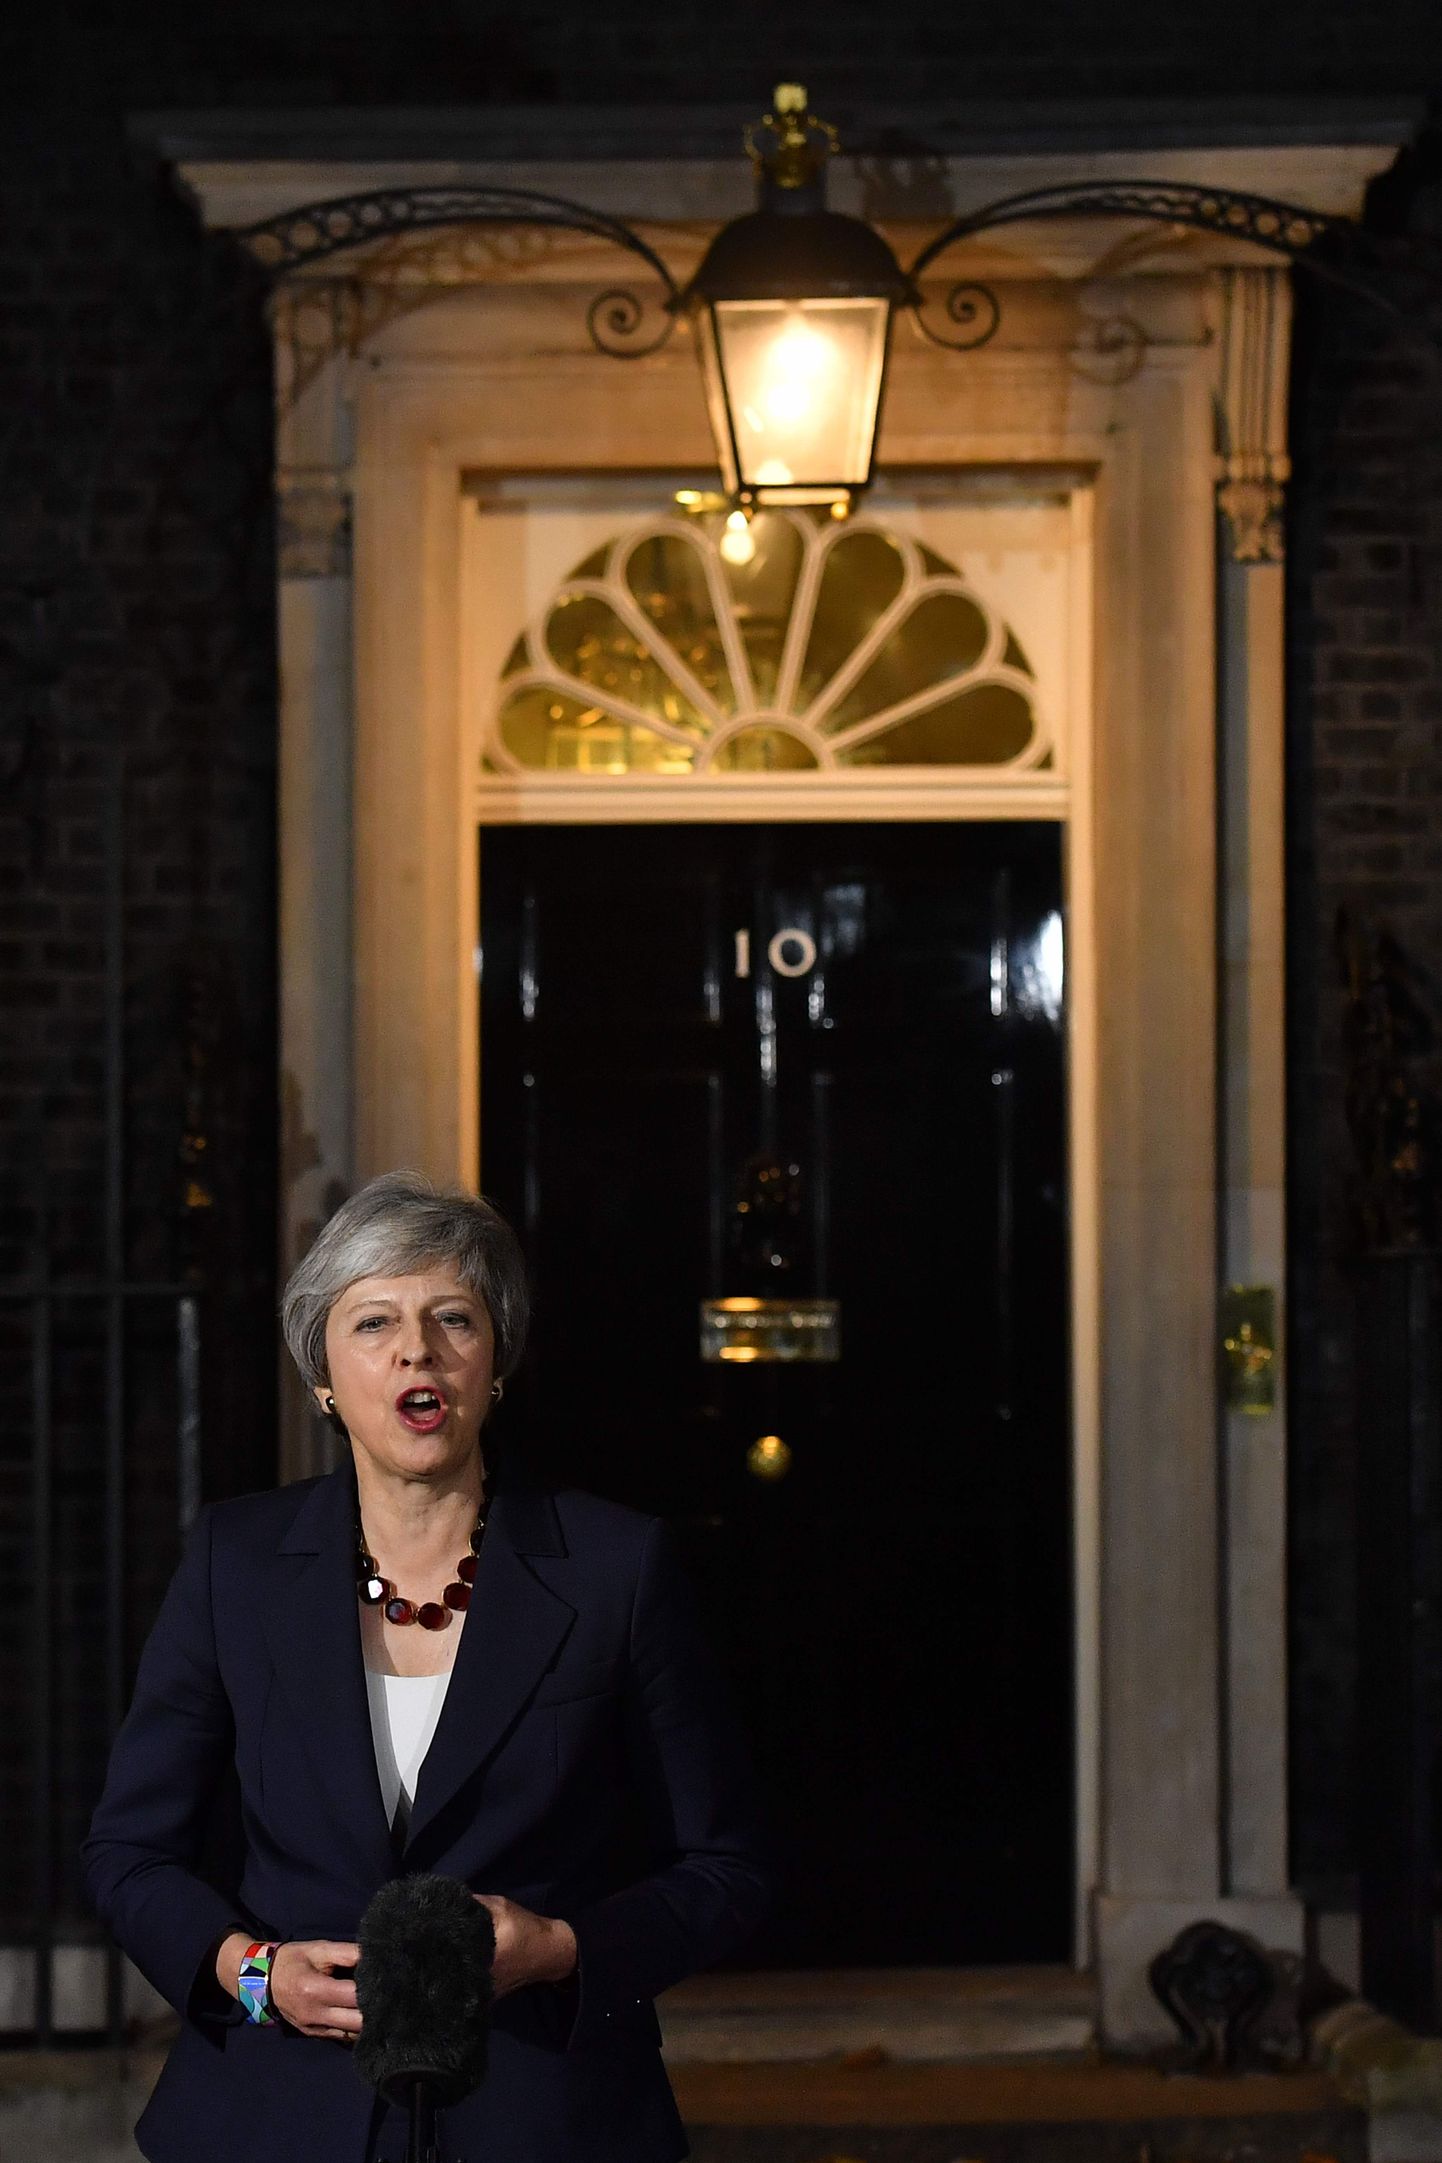 Britain's Prime Minister Theresa May gives a statement outside 10 Downing Street in London on November 14, 2018, after holding a cabinet meeting where ministers were expected to either back the draft bexit deal or quit. - British Prime Minister Theresa May defended her anguished draft divorce deal with the European Union on Wednesday before rowdy lawmakers and a splintered cabinet that threatens to fall apart. (Photo by Ben STANSALL / AFP)